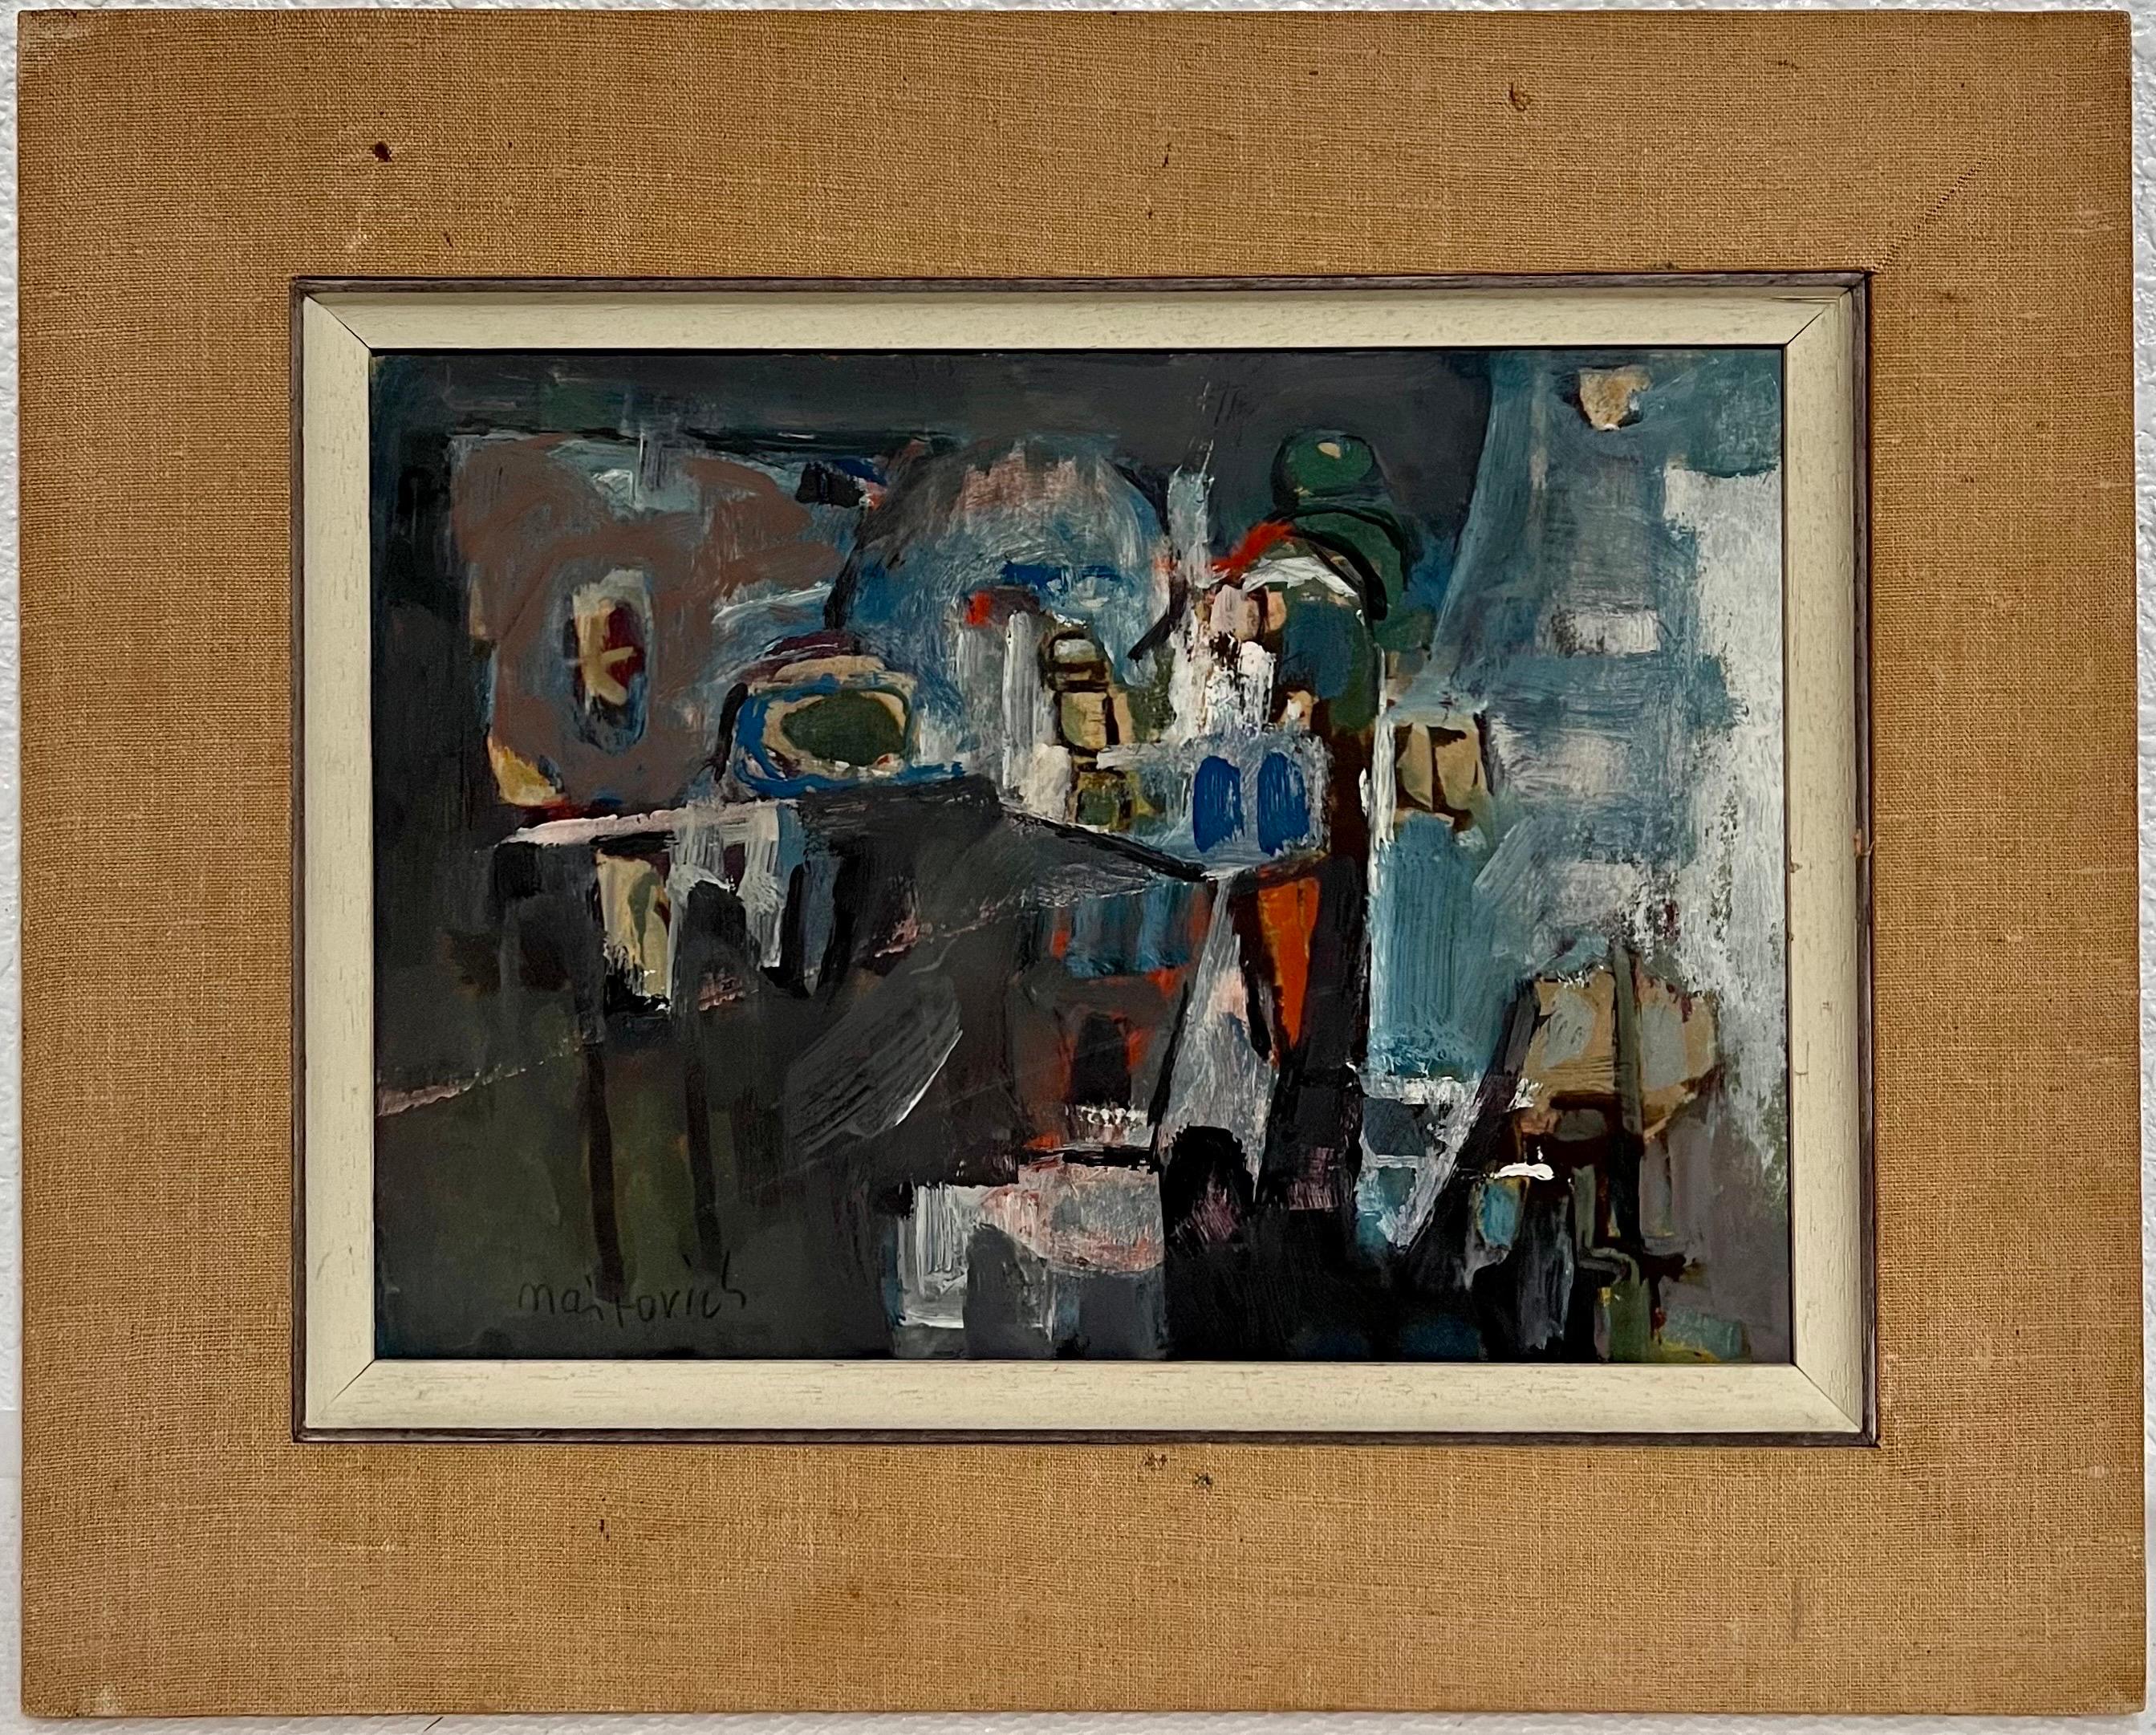 Bold, colorful abstract cityscape of Tel Aviv
15 X 19 inches including mat (needs new mat).  
painting is 10.5 X 14.5
Provenance: prominent South Florida art collection

Zvi Mairovich (1911-1974) was one of the most important Israeli abstract